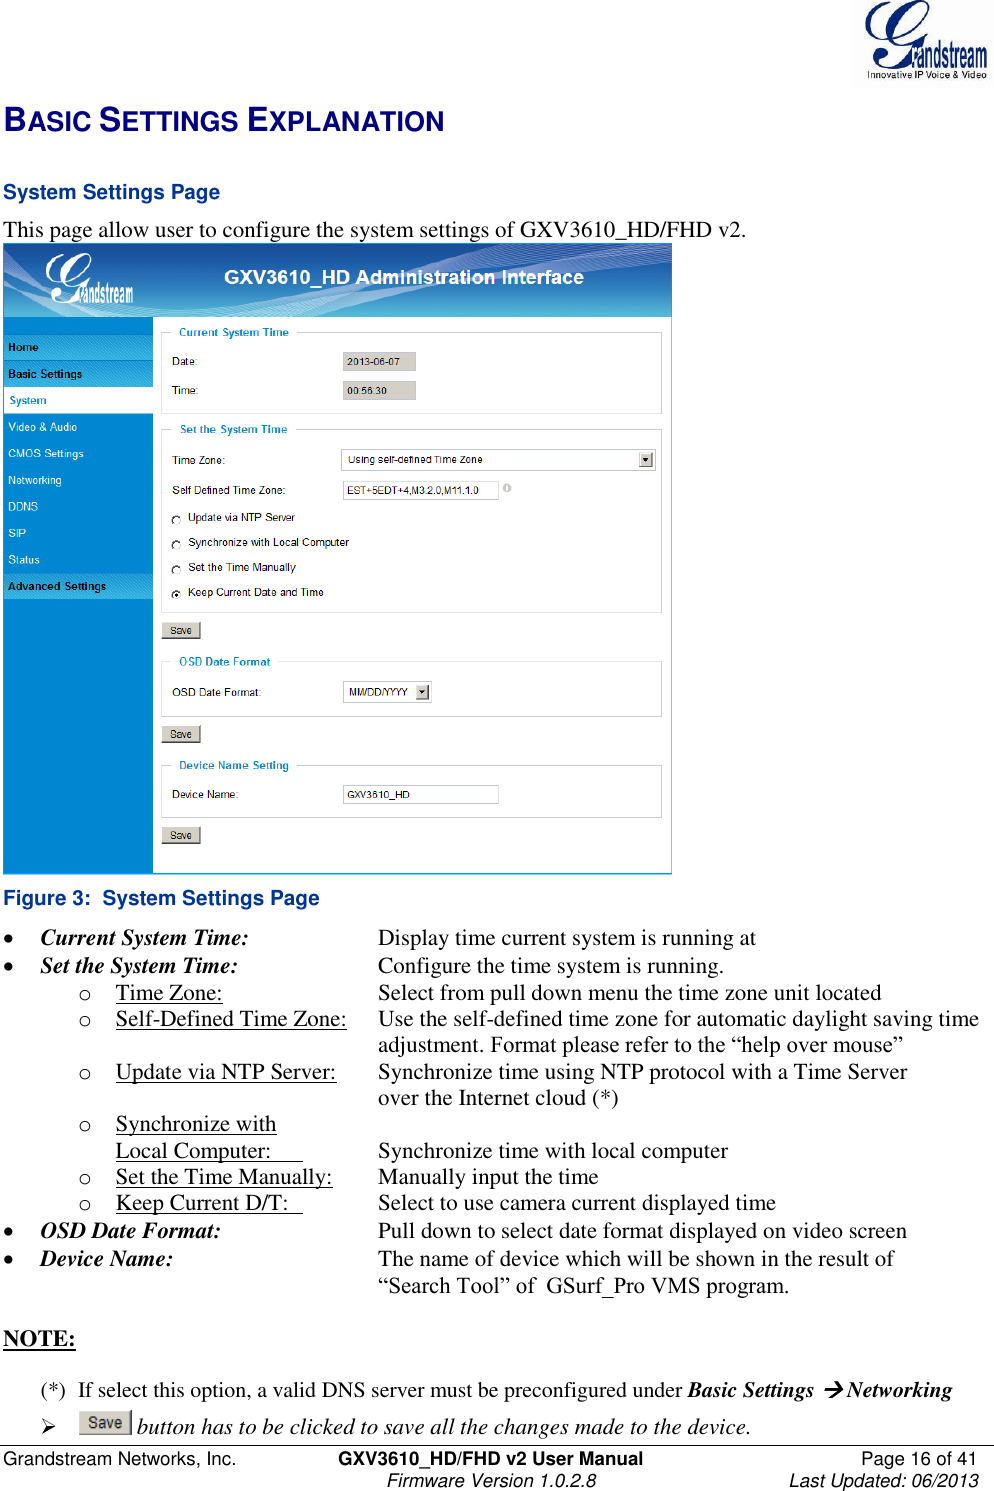  Grandstream Networks, Inc.  GXV3610_HD/FHD v2 User Manual  Page 16 of 41    Firmware Version 1.0.2.8  Last Updated: 06/2013  BASIC SETTINGS EXPLANATION  System Settings Page  This page allow user to configure the system settings of GXV3610_HD/FHD v2.  Figure 3:  System Settings Page  Current System Time:     Display time current system is running at  Set the System Time:     Configure the time system is running.  o Time Zone:     Select from pull down menu the time zone unit located o Self-Defined Time Zone:   Use the self-defined time zone for automatic daylight saving time adjustment. Format please refer to the “help over mouse”  o Update via NTP Server:   Synchronize time using NTP protocol with a Time Server over the Internet cloud (*) o Synchronize with  Local Computer:    Synchronize time with local computer  o Set the Time Manually:  Manually input the time o Keep Current D/T:    Select to use camera current displayed time  OSD Date Format:     Pull down to select date format displayed on video screen  Device Name:    The name of device which will be shown in the result of “Search Tool” of  GSurf_Pro VMS program.  NOTE:   (*)  If select this option, a valid DNS server must be preconfigured under Basic Settings  Networking   button has to be clicked to save all the changes made to the device.  